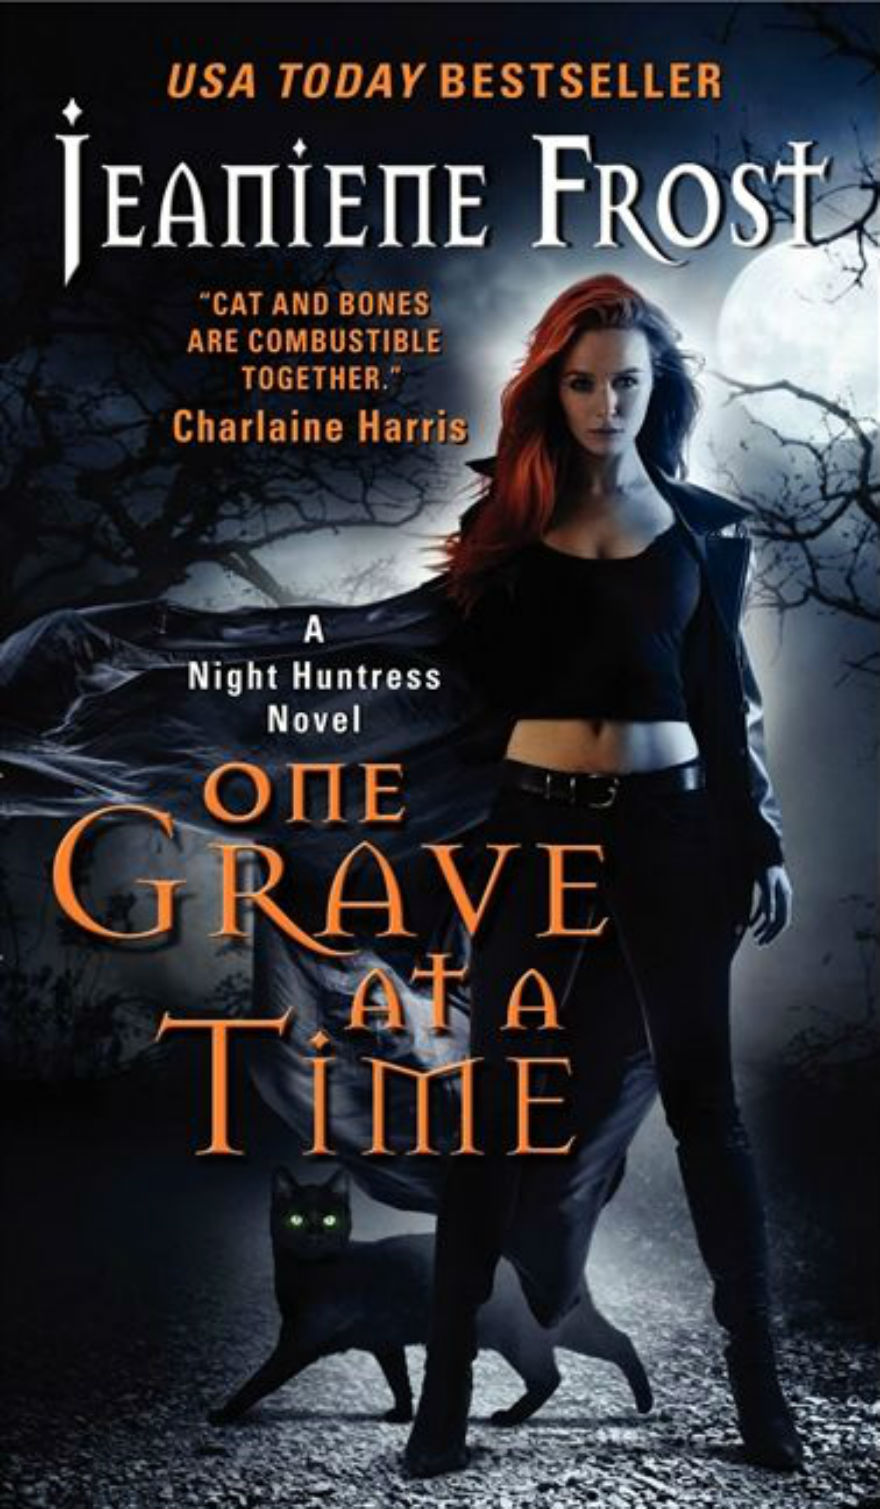 One Grave At A Time by Jeaniene Frost [ Inkvotary ]